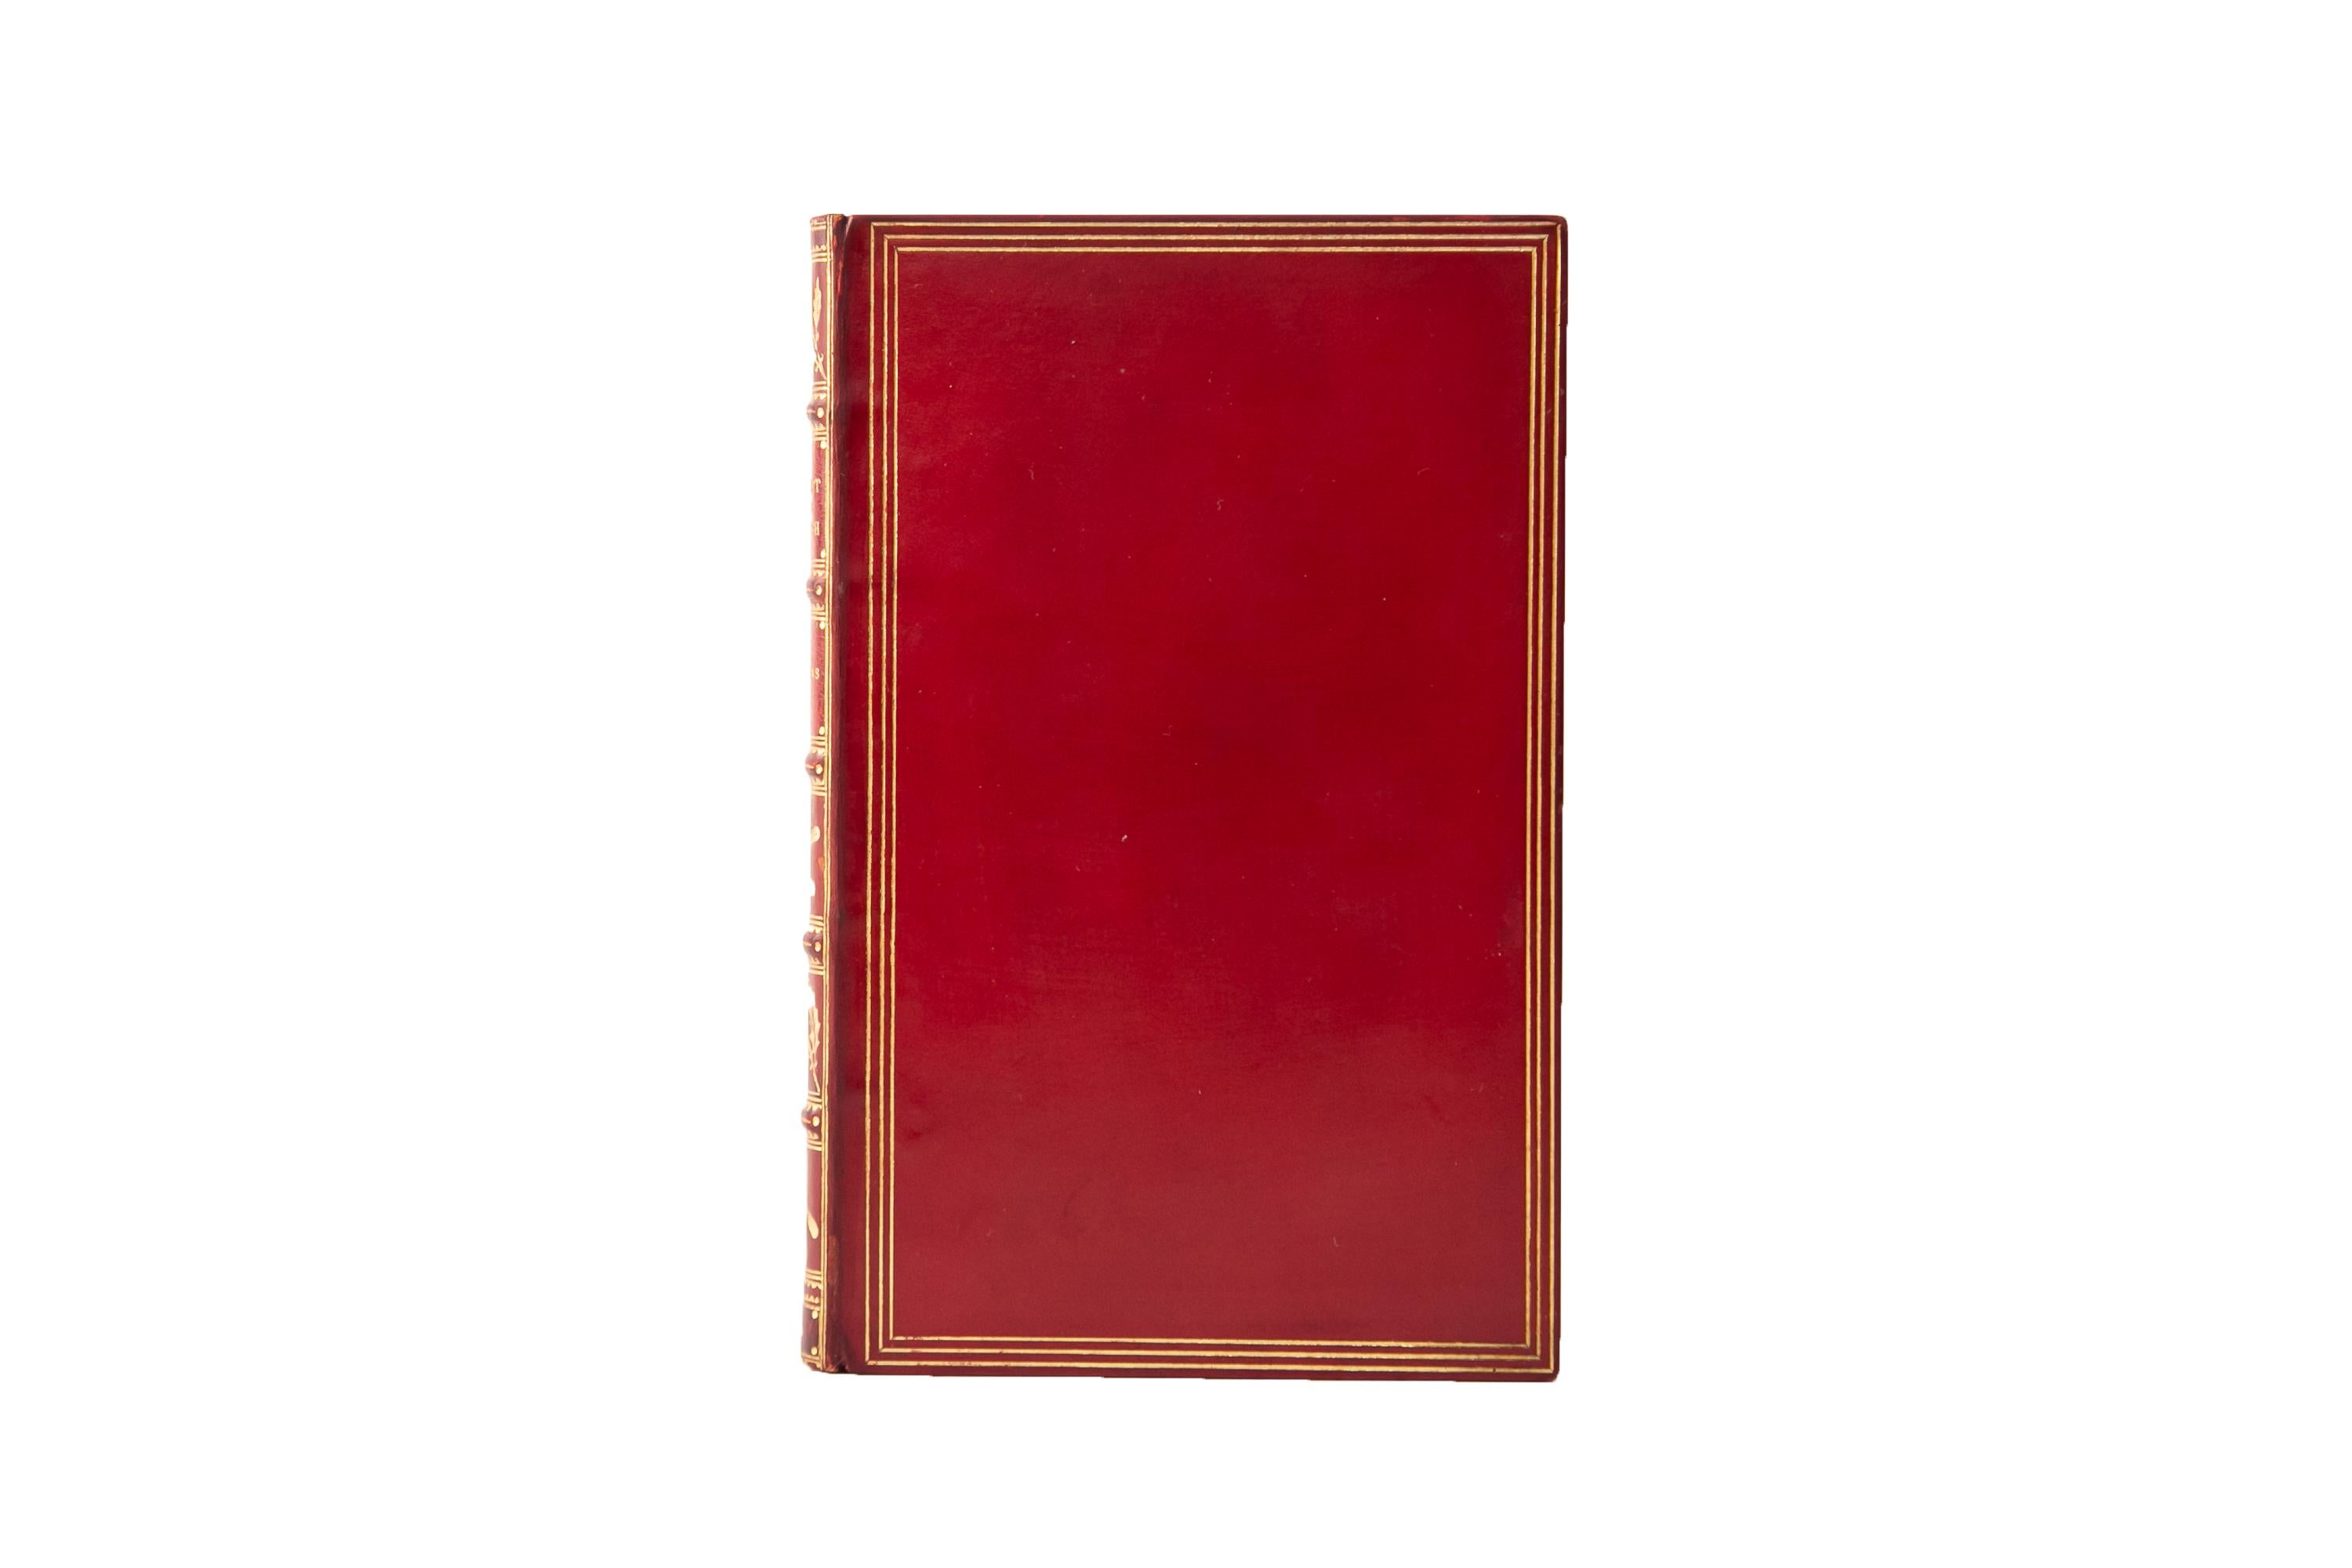 5 Volumes. Charles Dickens, The Christman Books. Mixed Edition. Bound by Zaehnsdorf in full red calf with the covers displaying a gilt-tooled triple border. Raised bands gilt with panels displaying holly, bordering, and label lettering, all